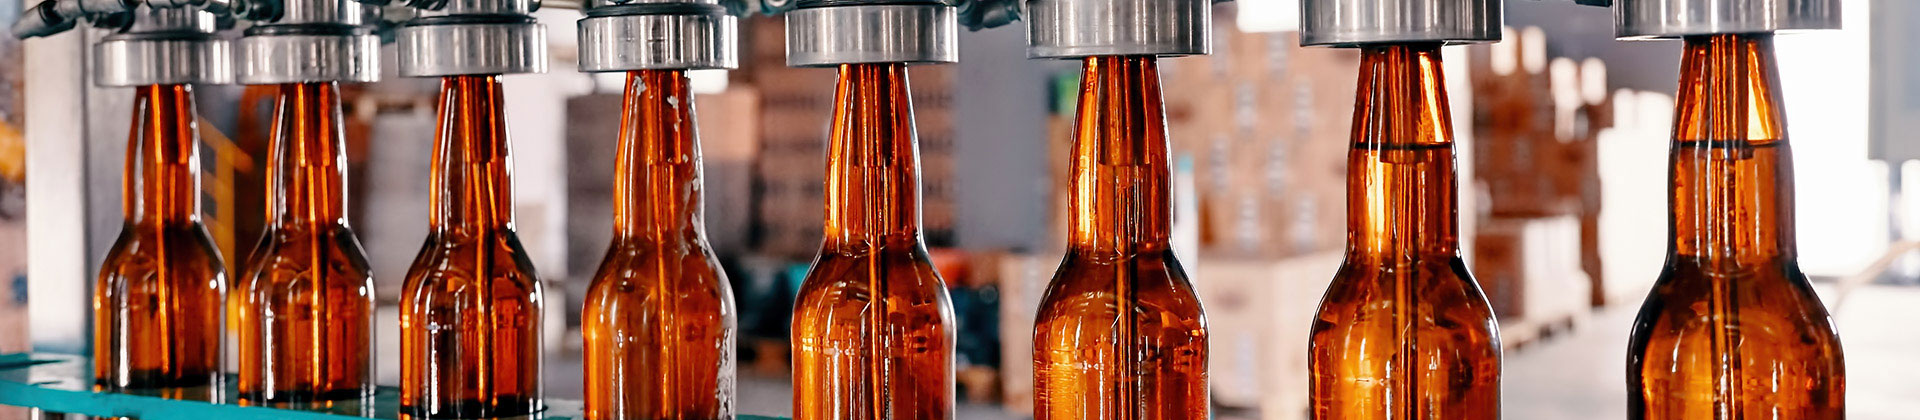 Beer bottles in an automated filling line.